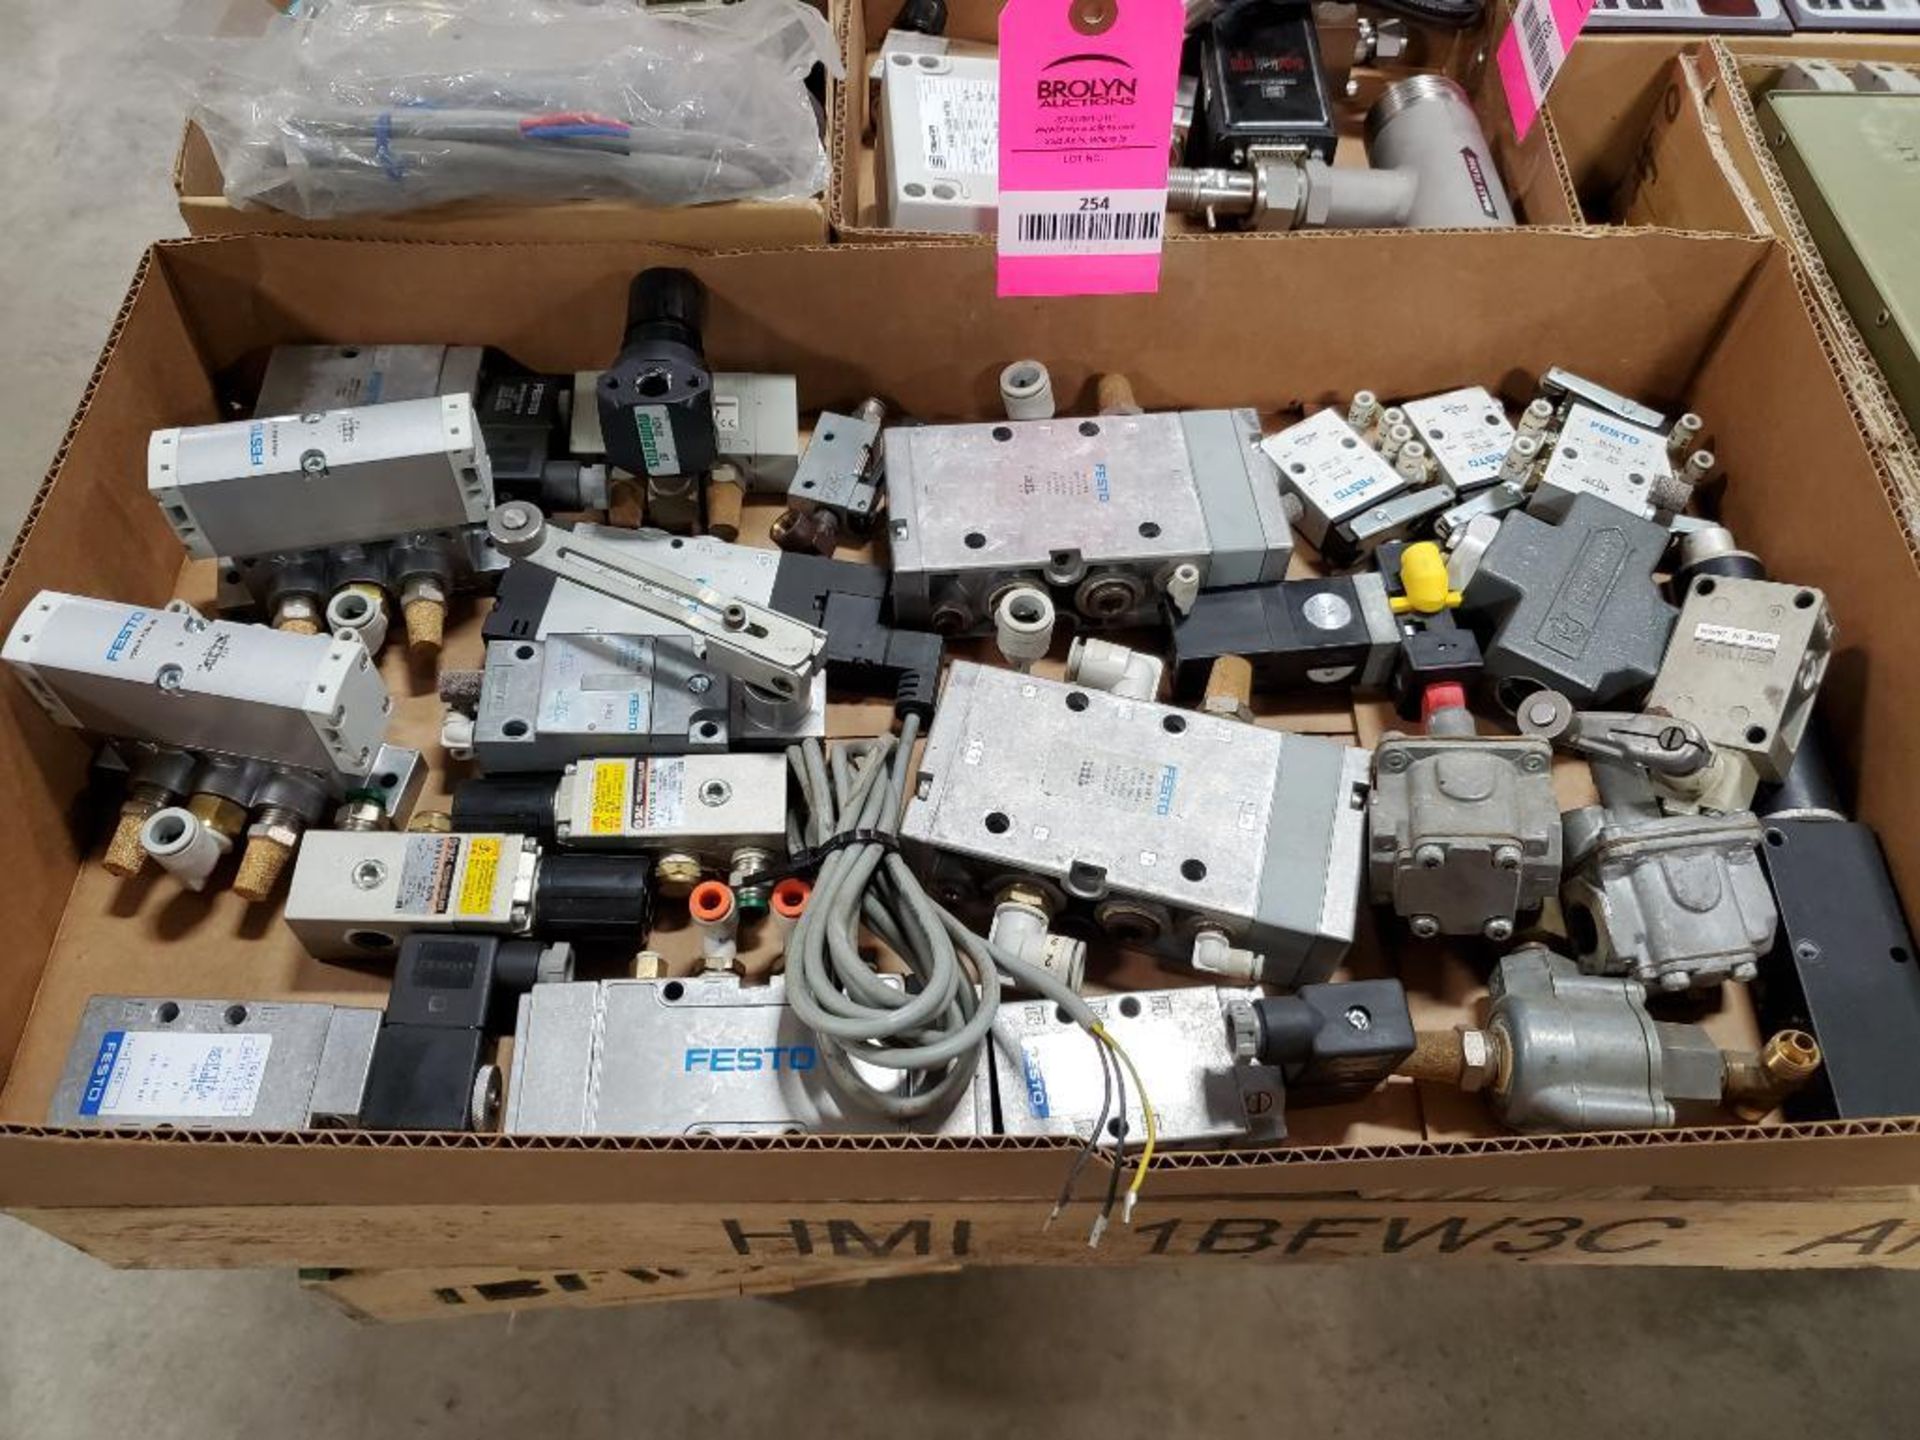 Assorted electrical and repair parts.